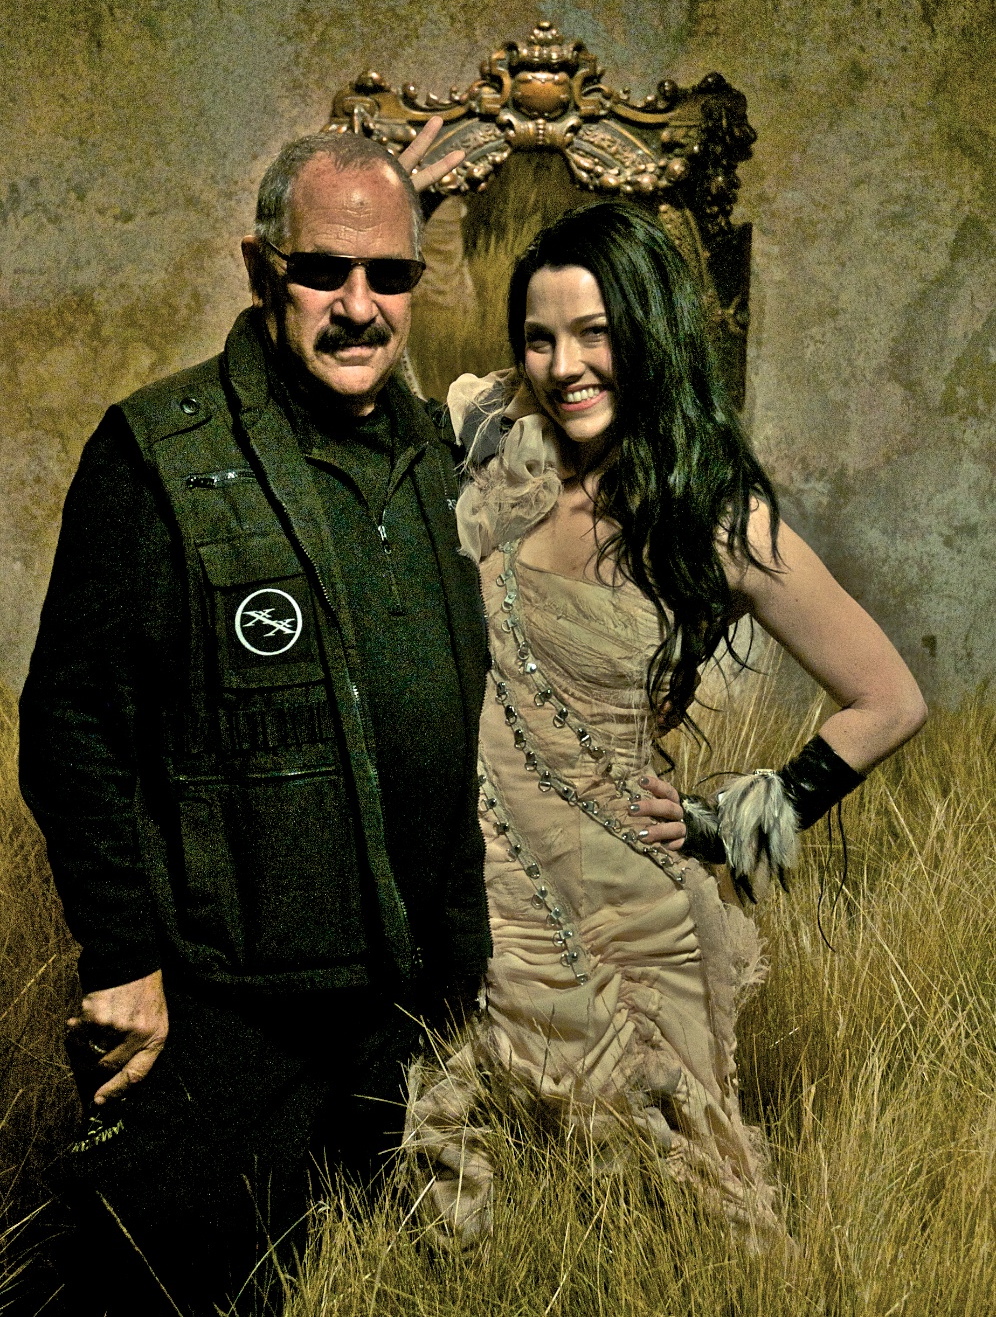 Producer Arthur Gorson with Amy Lee on set for Evanescence's 